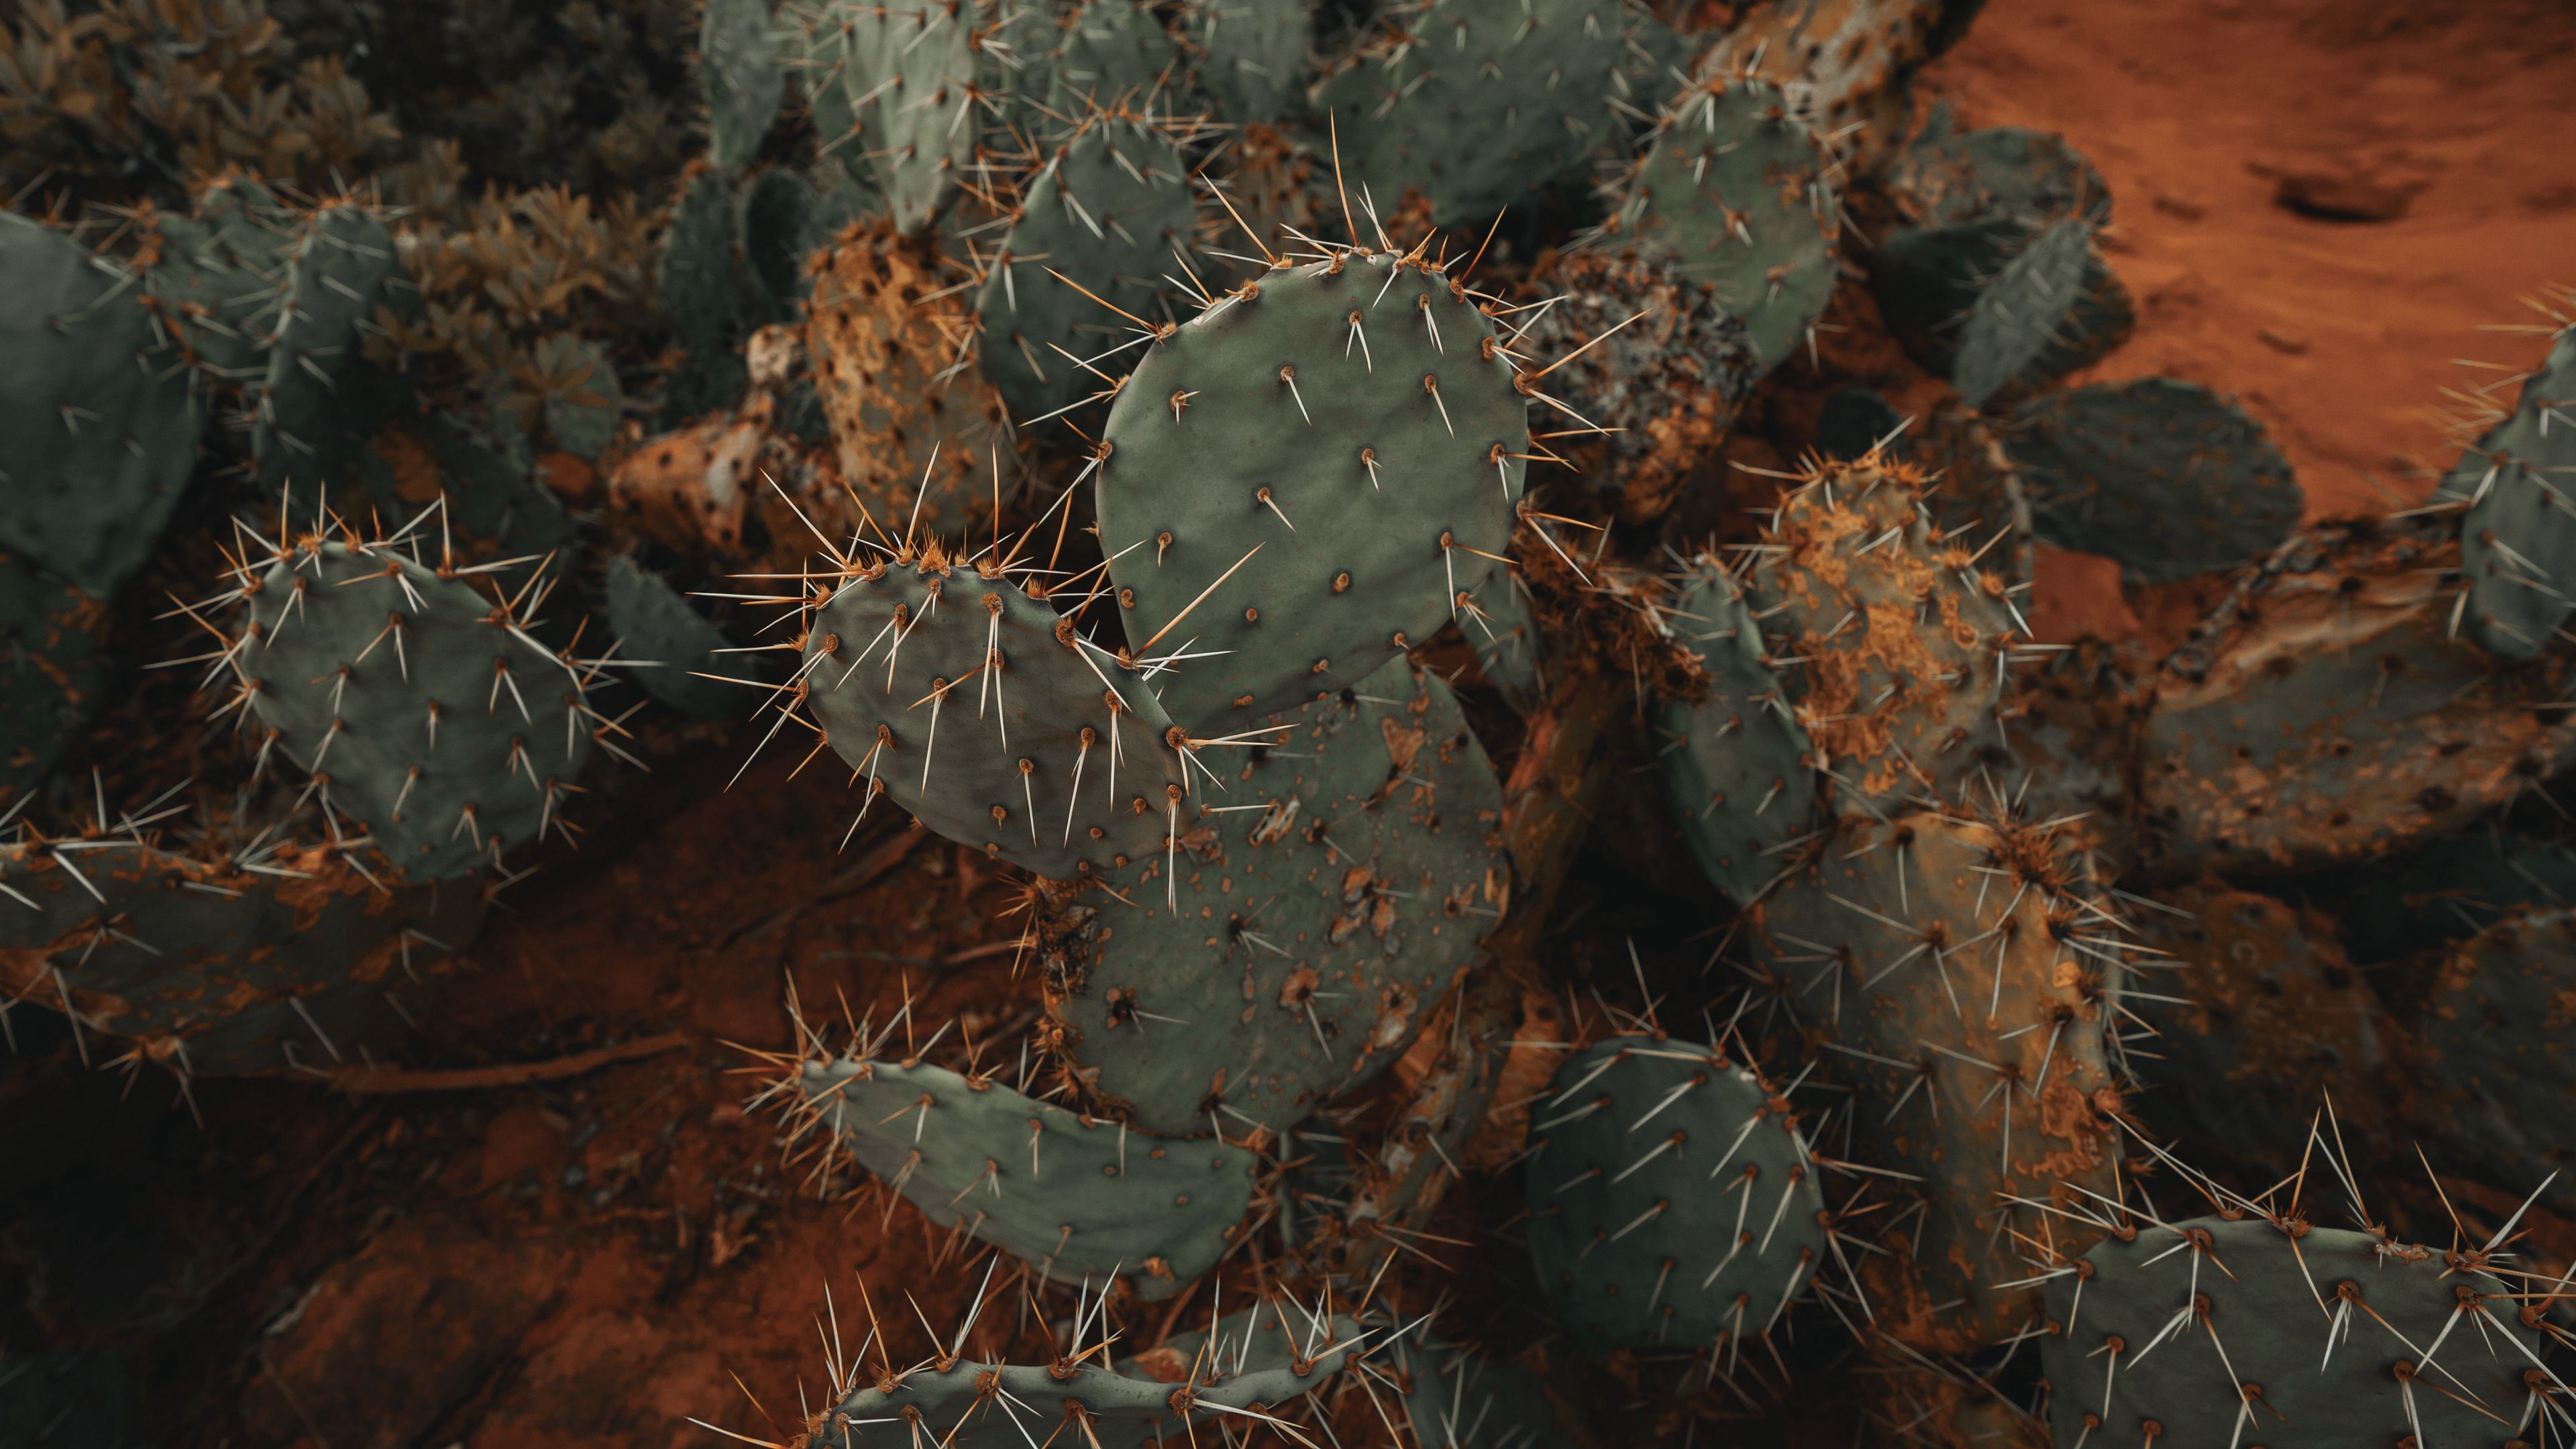 Download wallpaper 3840x2160 cactus, succulent, prickly, green, plant 4k  uhd 16:9 hd background